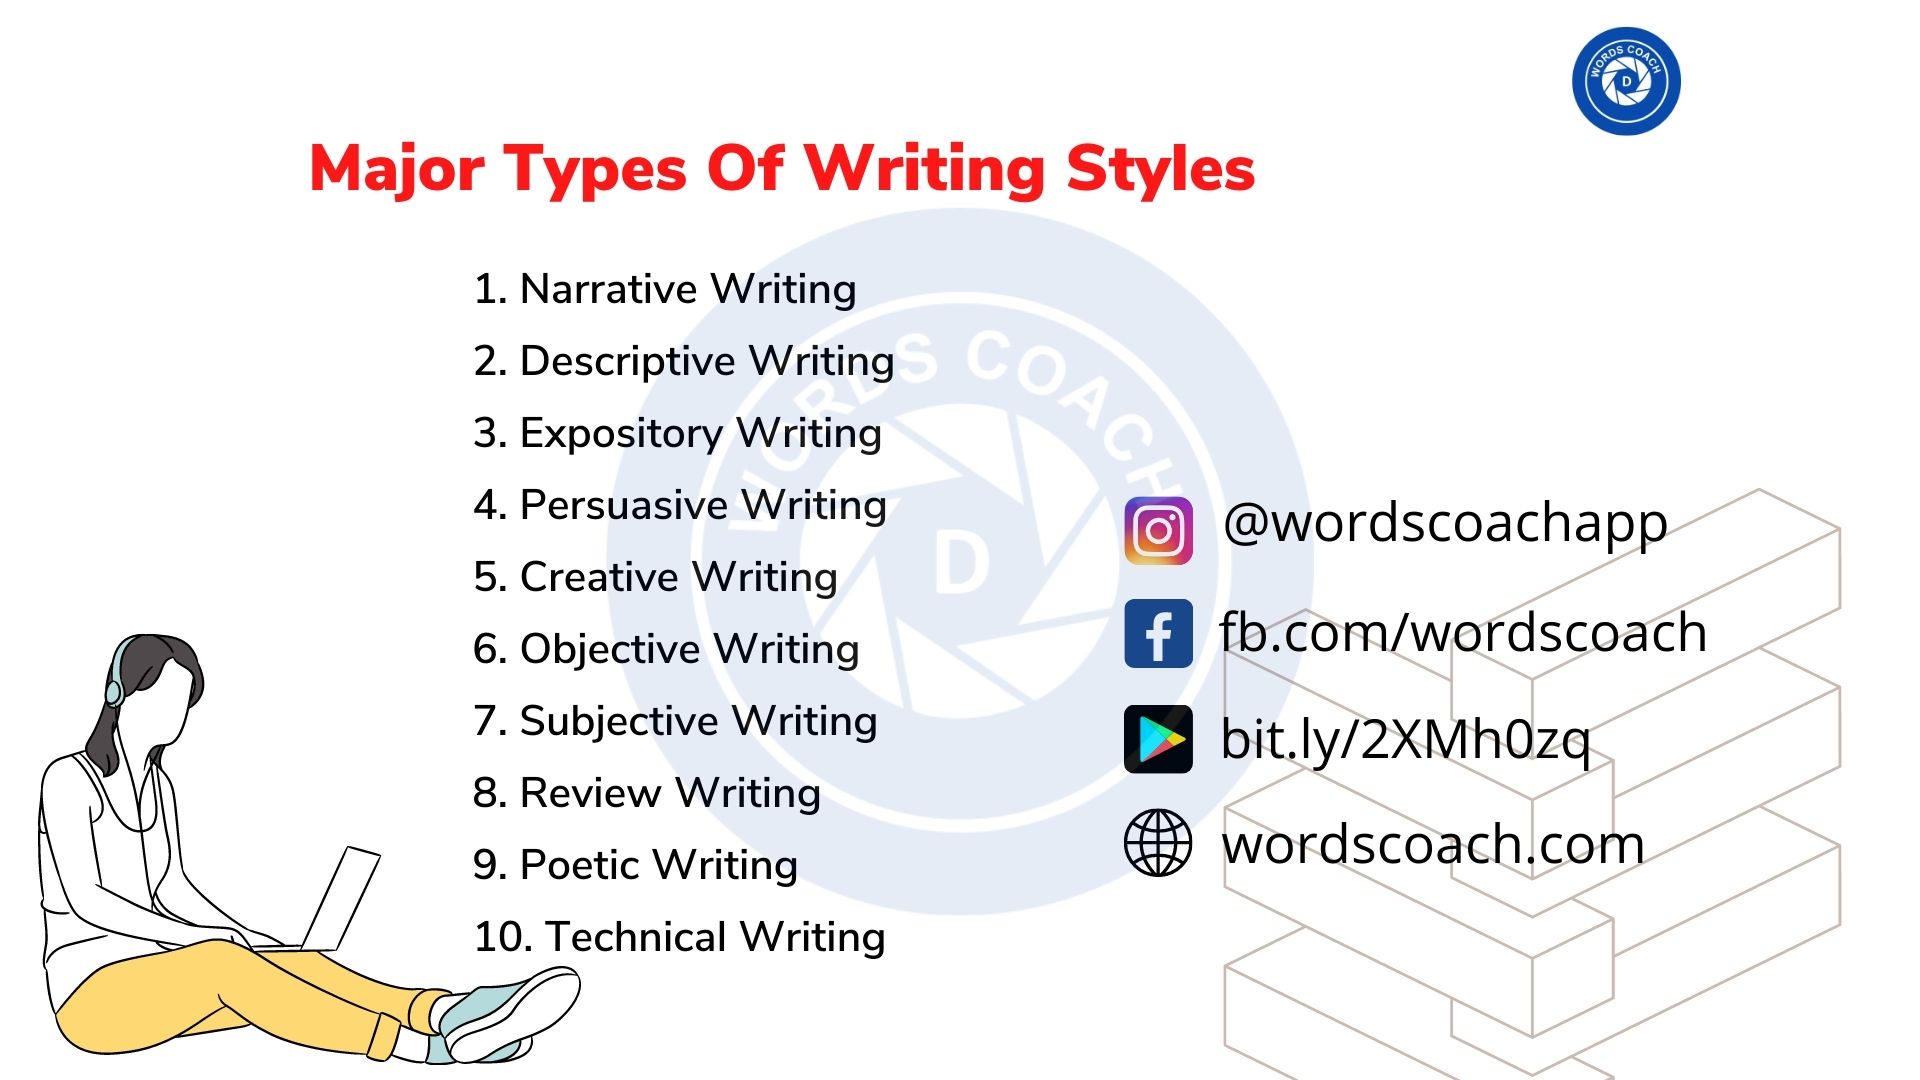 Major Types Of Writing Styles